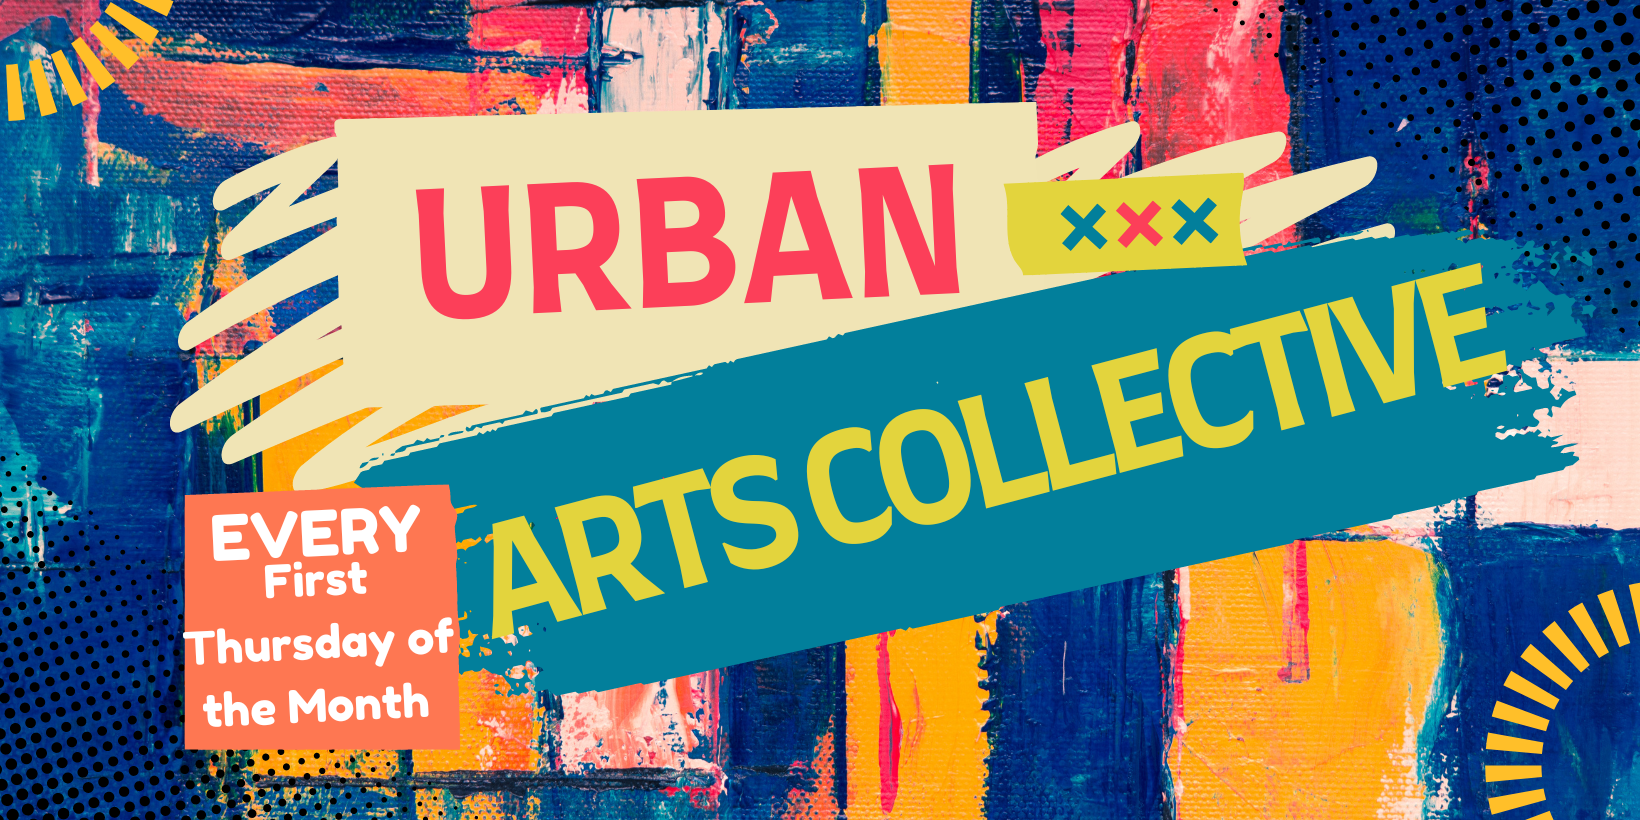 Urban Arts Collective, every first Thursday at Urban Eats in Downtown Dutchtown.